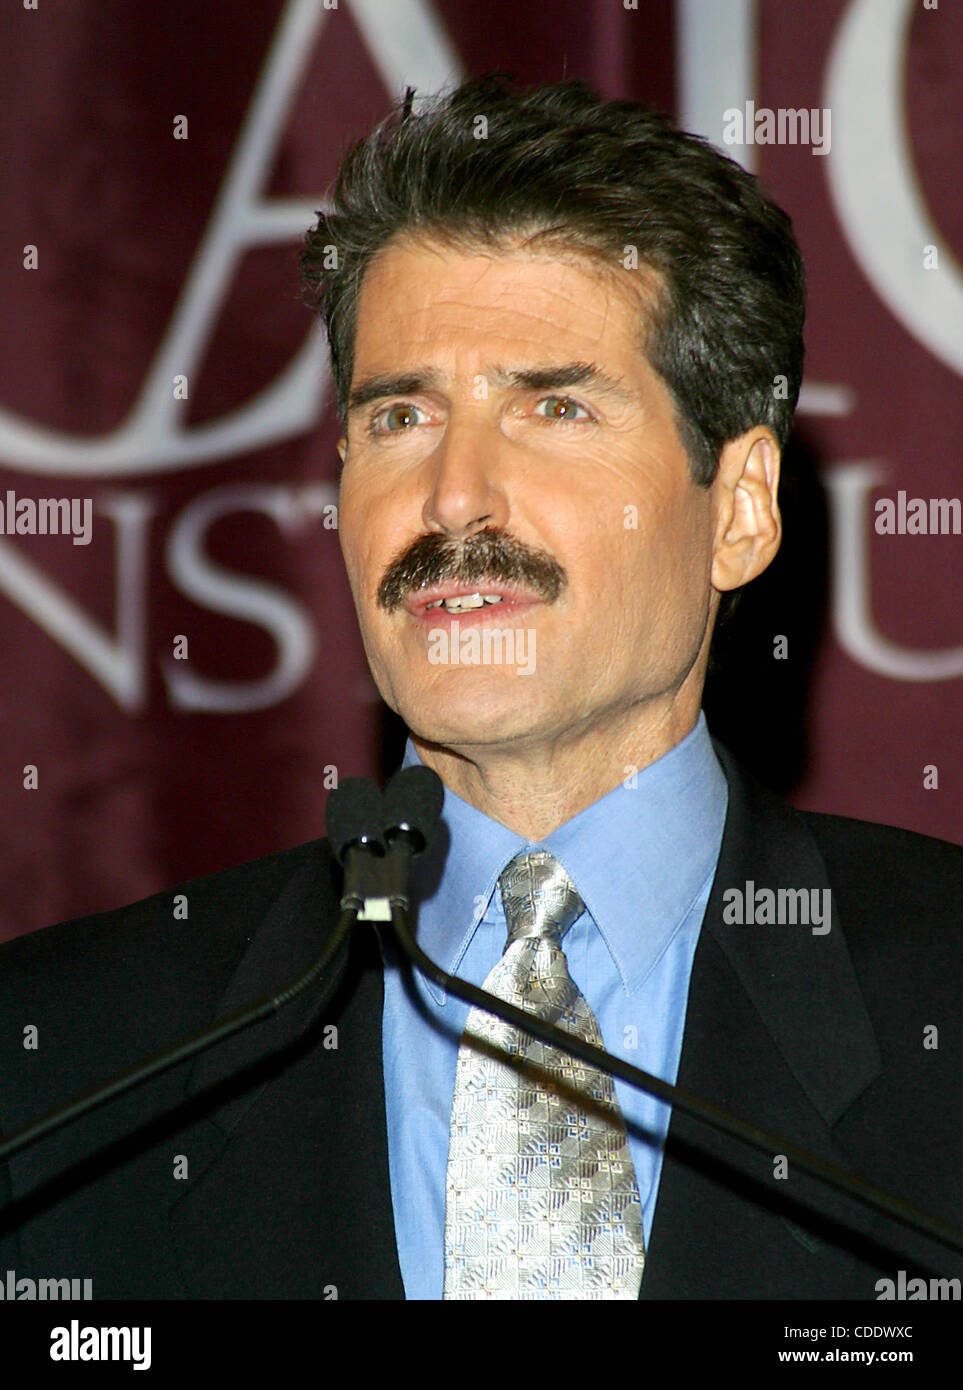 Jan. 1, 2011 - New York, New York, U.S. - K35117RM.(CATO) .A CATO INSTITUTE LUNCHEON IN COOPERATION WITH THE DONALD AND PAULA SMITH FAMILY FOUNDATION, FEATURING ''JOHN STOSSEL'' CO-ANCHOR OF ABC'S 20/20..AUTHOR OF GIVE ME A BREAK: HOW I EXPOSED HUCKSTERS, CHEATS, AND SCAM ARTISTS AND BECAME THE SCOU Stock Photo